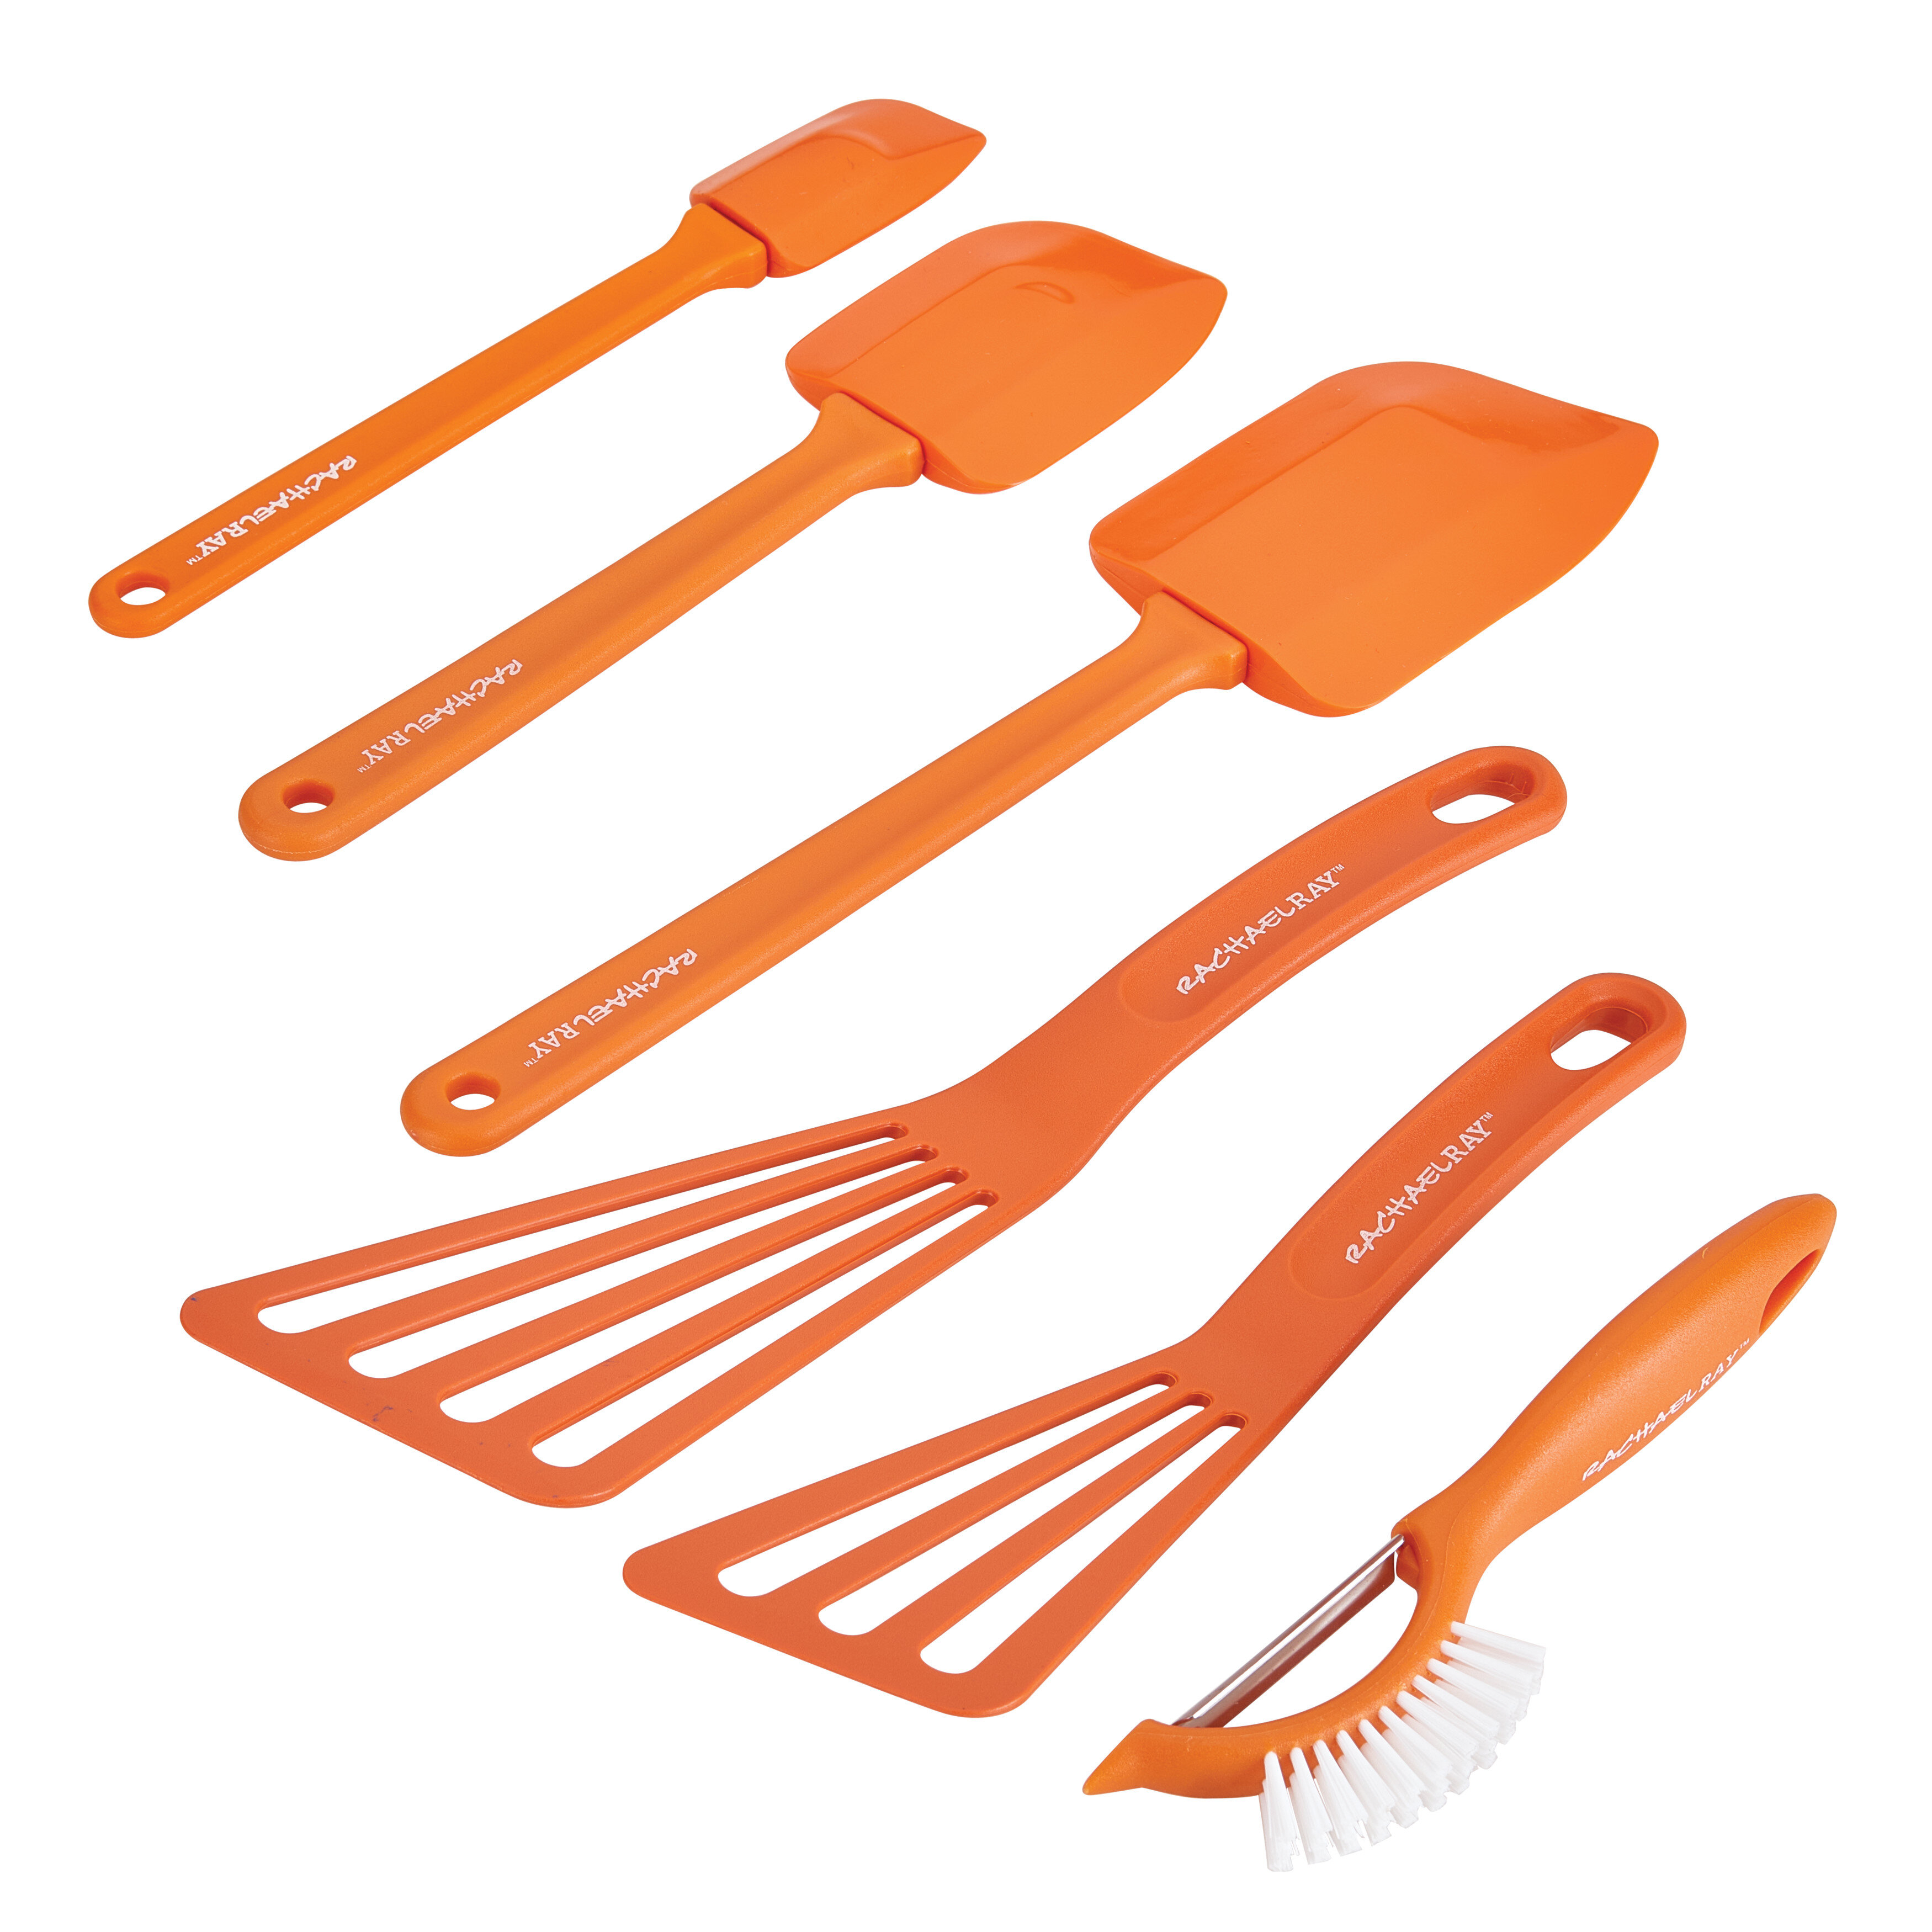 Rachael Ray Kitchen Utensils Turner And Spatula Mix And Flip Set, 5-Piece &  Reviews